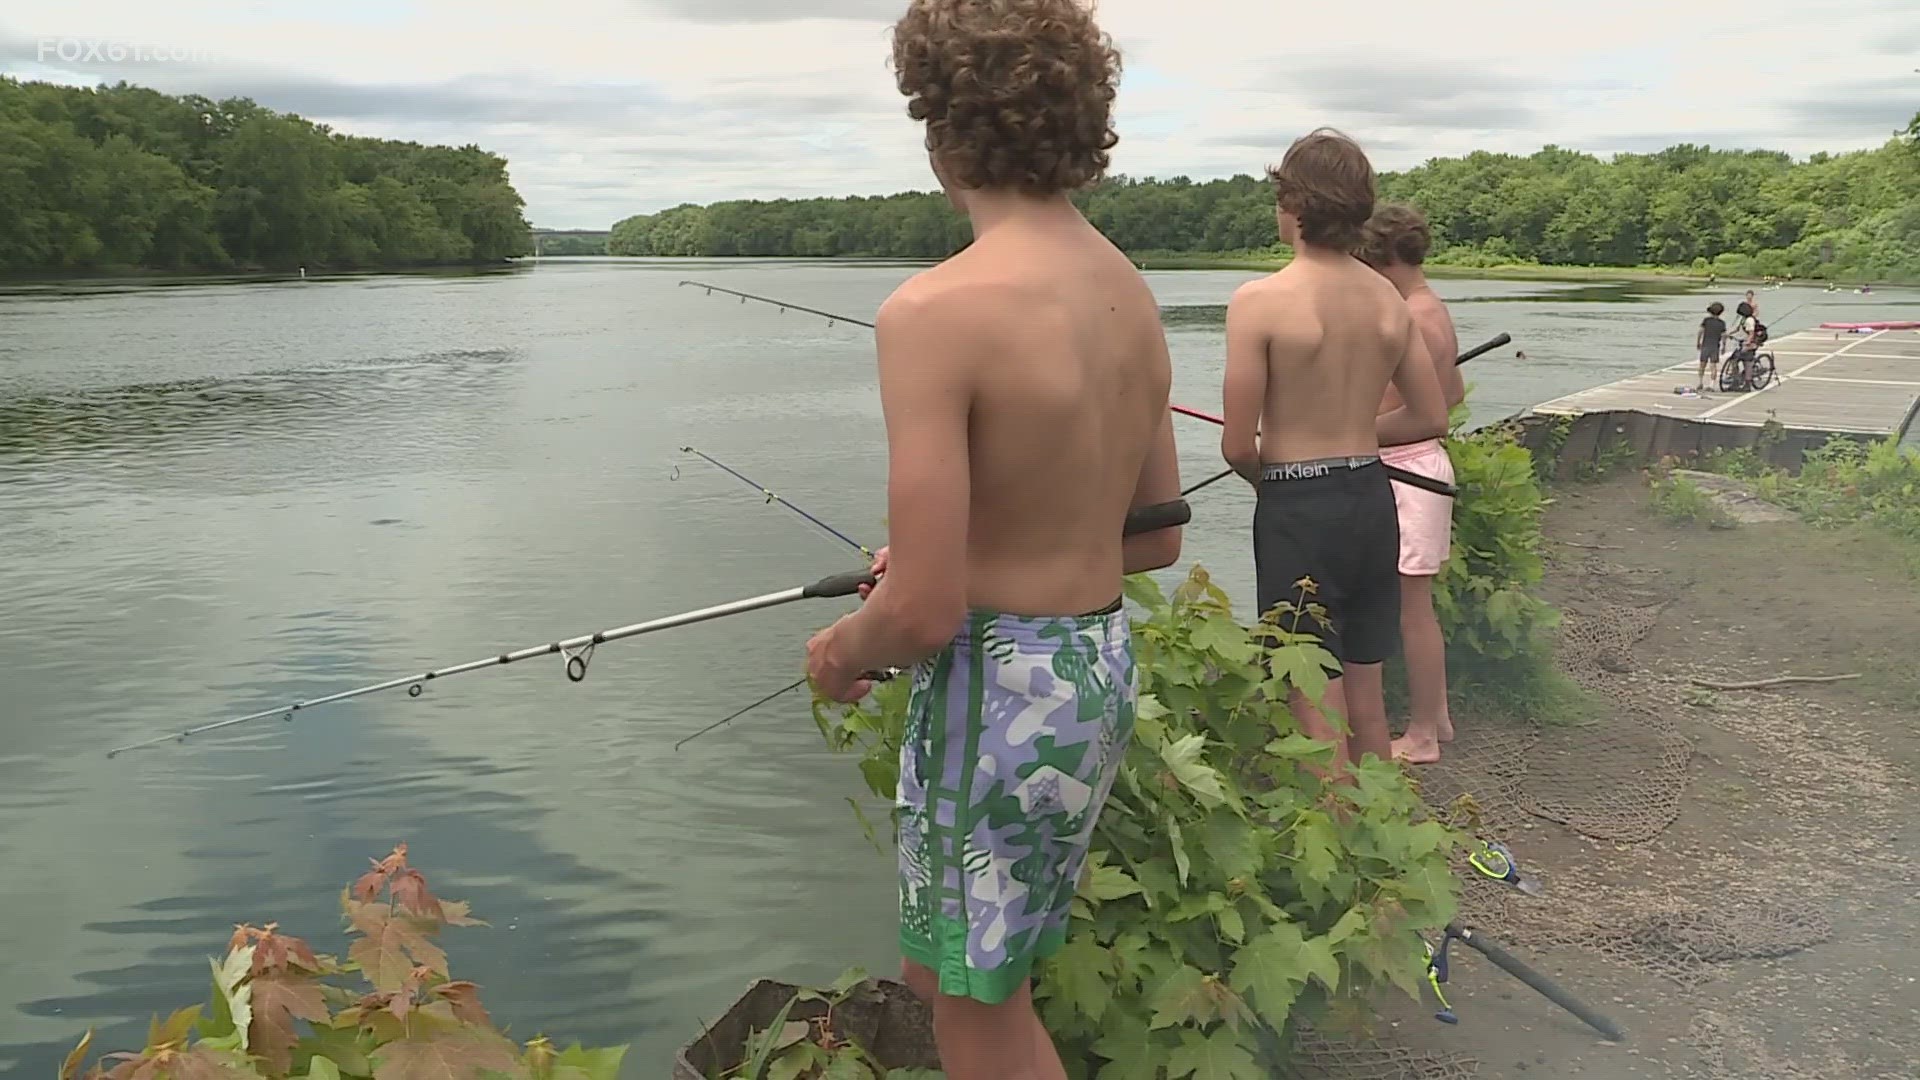 Fish advisory issued for Connecticut River